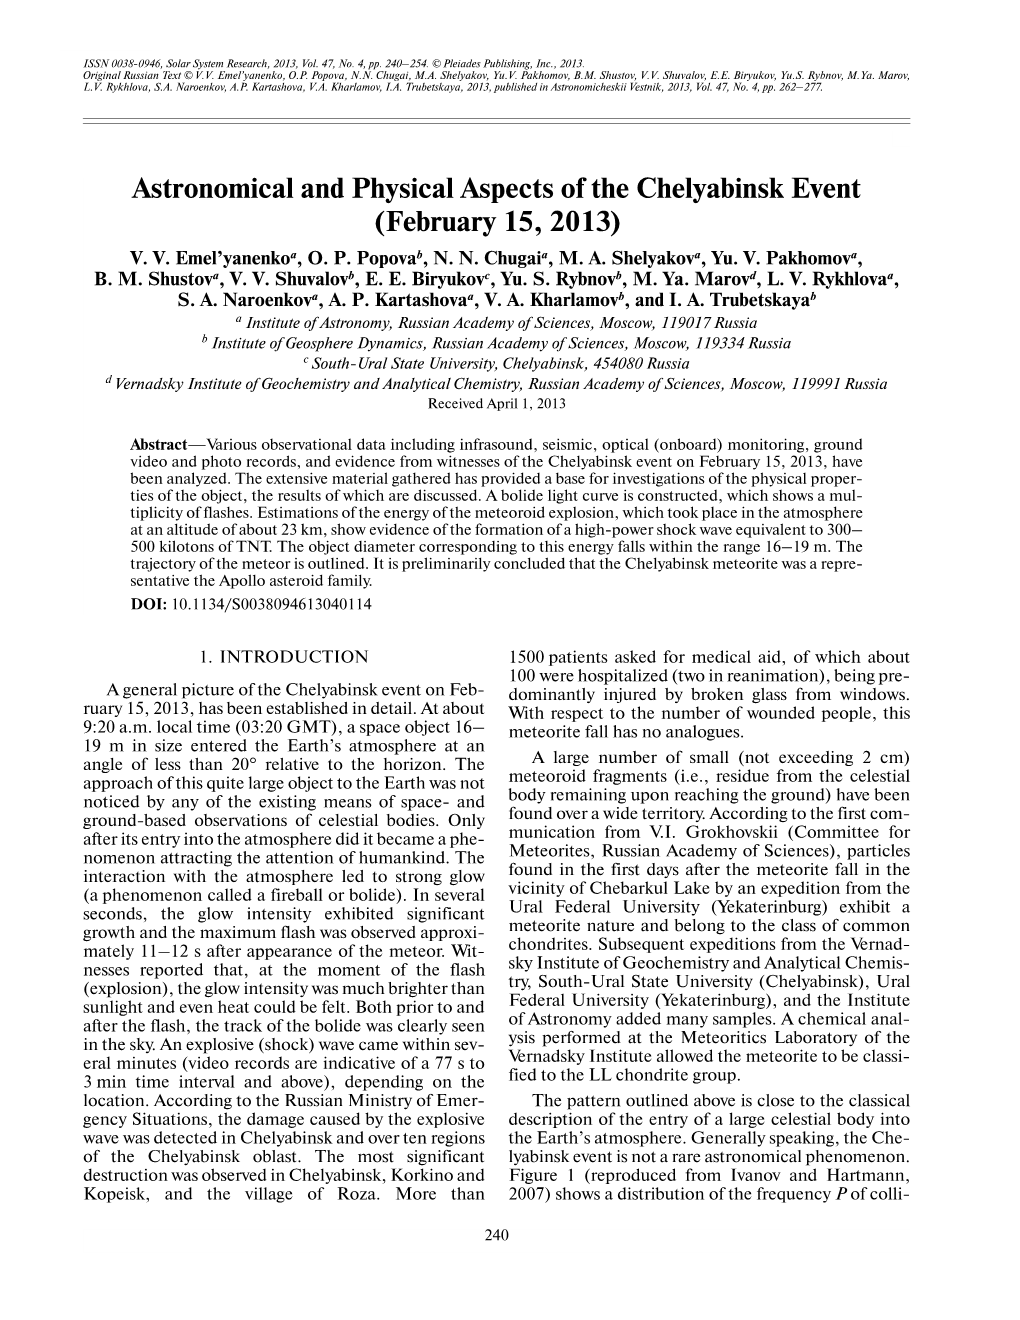 Astronomical and Physical Aspects of the Chelyabinsk Event (February 15, 2013) V